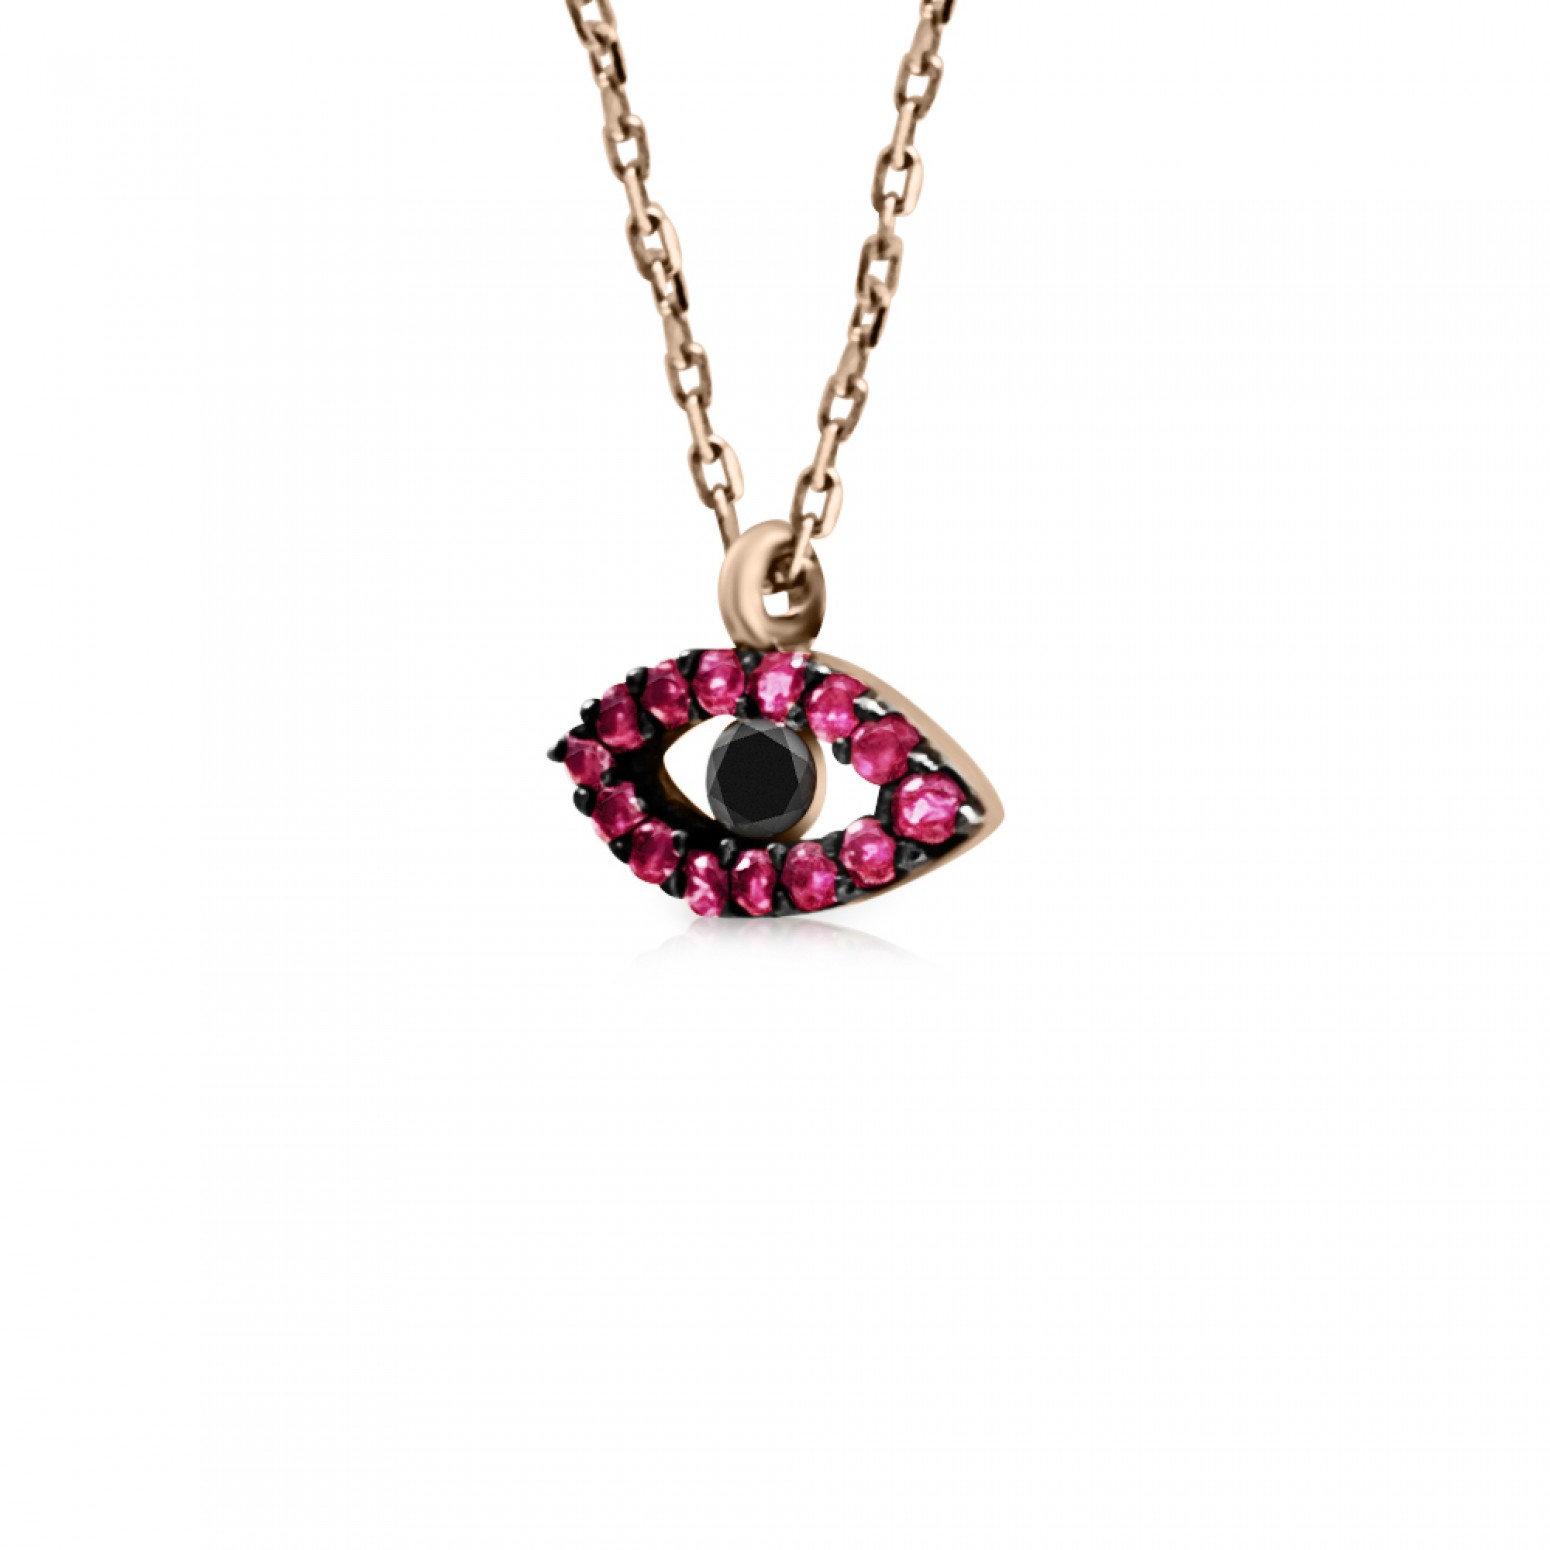 Eye necklace, Κ14 pink gold with red and black zircon, ko3116 NECKLACES Κοσμηματα - chrilia.gr